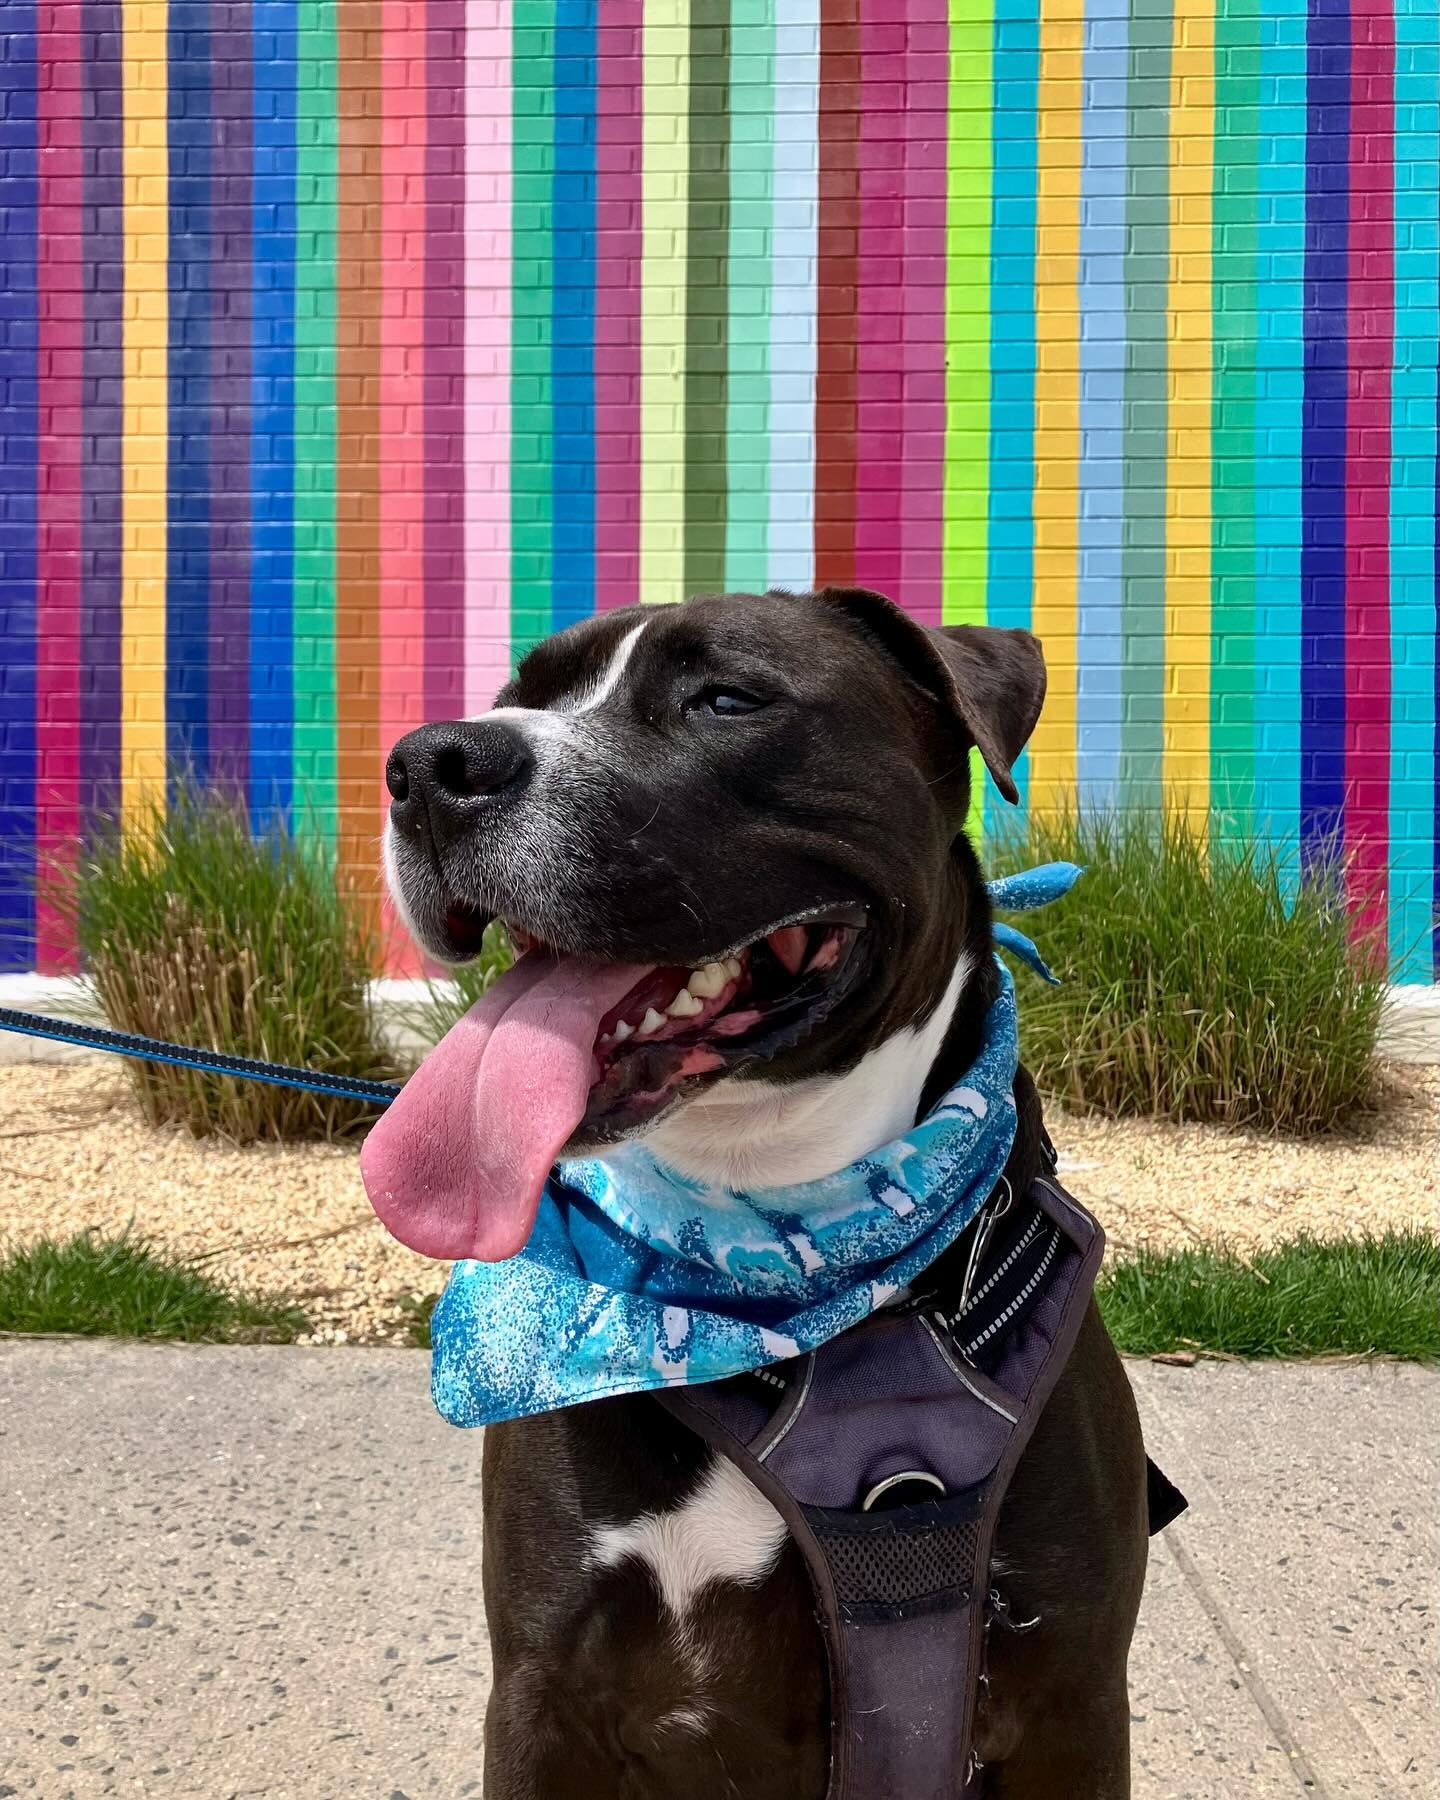 greetings from asbury park! 🫶 celebrated sparkle turning ✨2✨ yesterday 🥹💖🎂 - made new friends at the dog beach 🐶, walked the boardwalk 🐾, got pizza 🍕, enjoyed peanut butter pup cups from @bettysicebox 🍦, and stopped by @pawsbarkeryandboutique